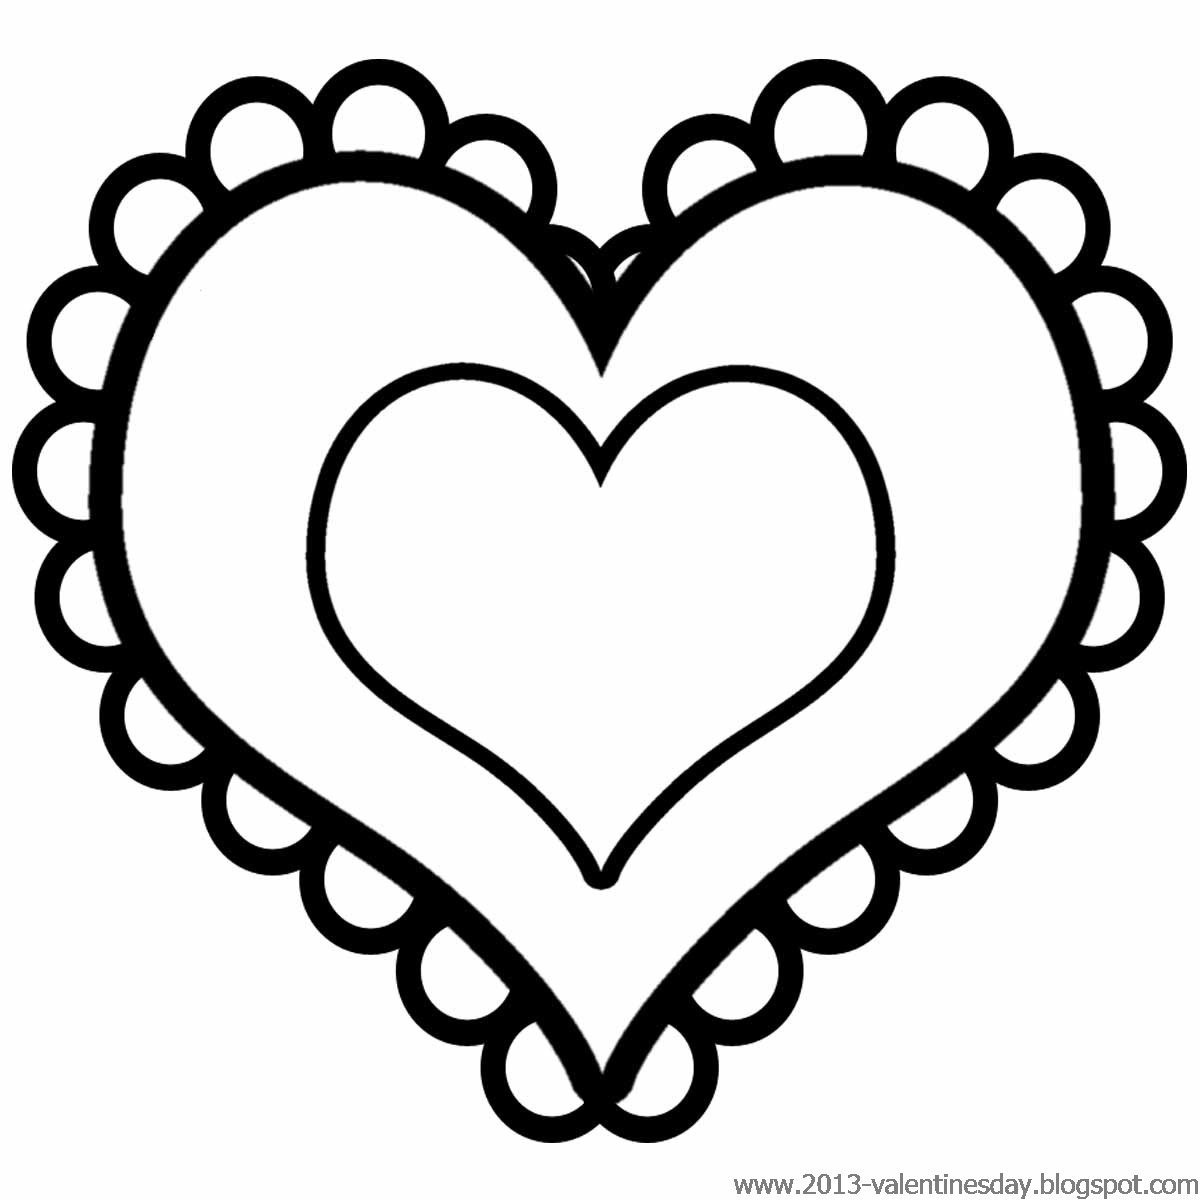 Heart Clipart Black And White - free clipart download - white heart clip art, valentine candy hearts clip art, thank you heart clipart, pink hearts clip art, medical heart clipart, line of hearts clipart, kool heart clip art, infinity heart clipart, hearts and flowers clipart, heart shape clipart png, heart shape clip art, heart jpg clipart, heart clipart, heart clip arts, heart banner clipart, heart and cross clipart, free clip art anatomic heart black and white, drawn heart clipart, conversation heart clipart, boho heart clipart